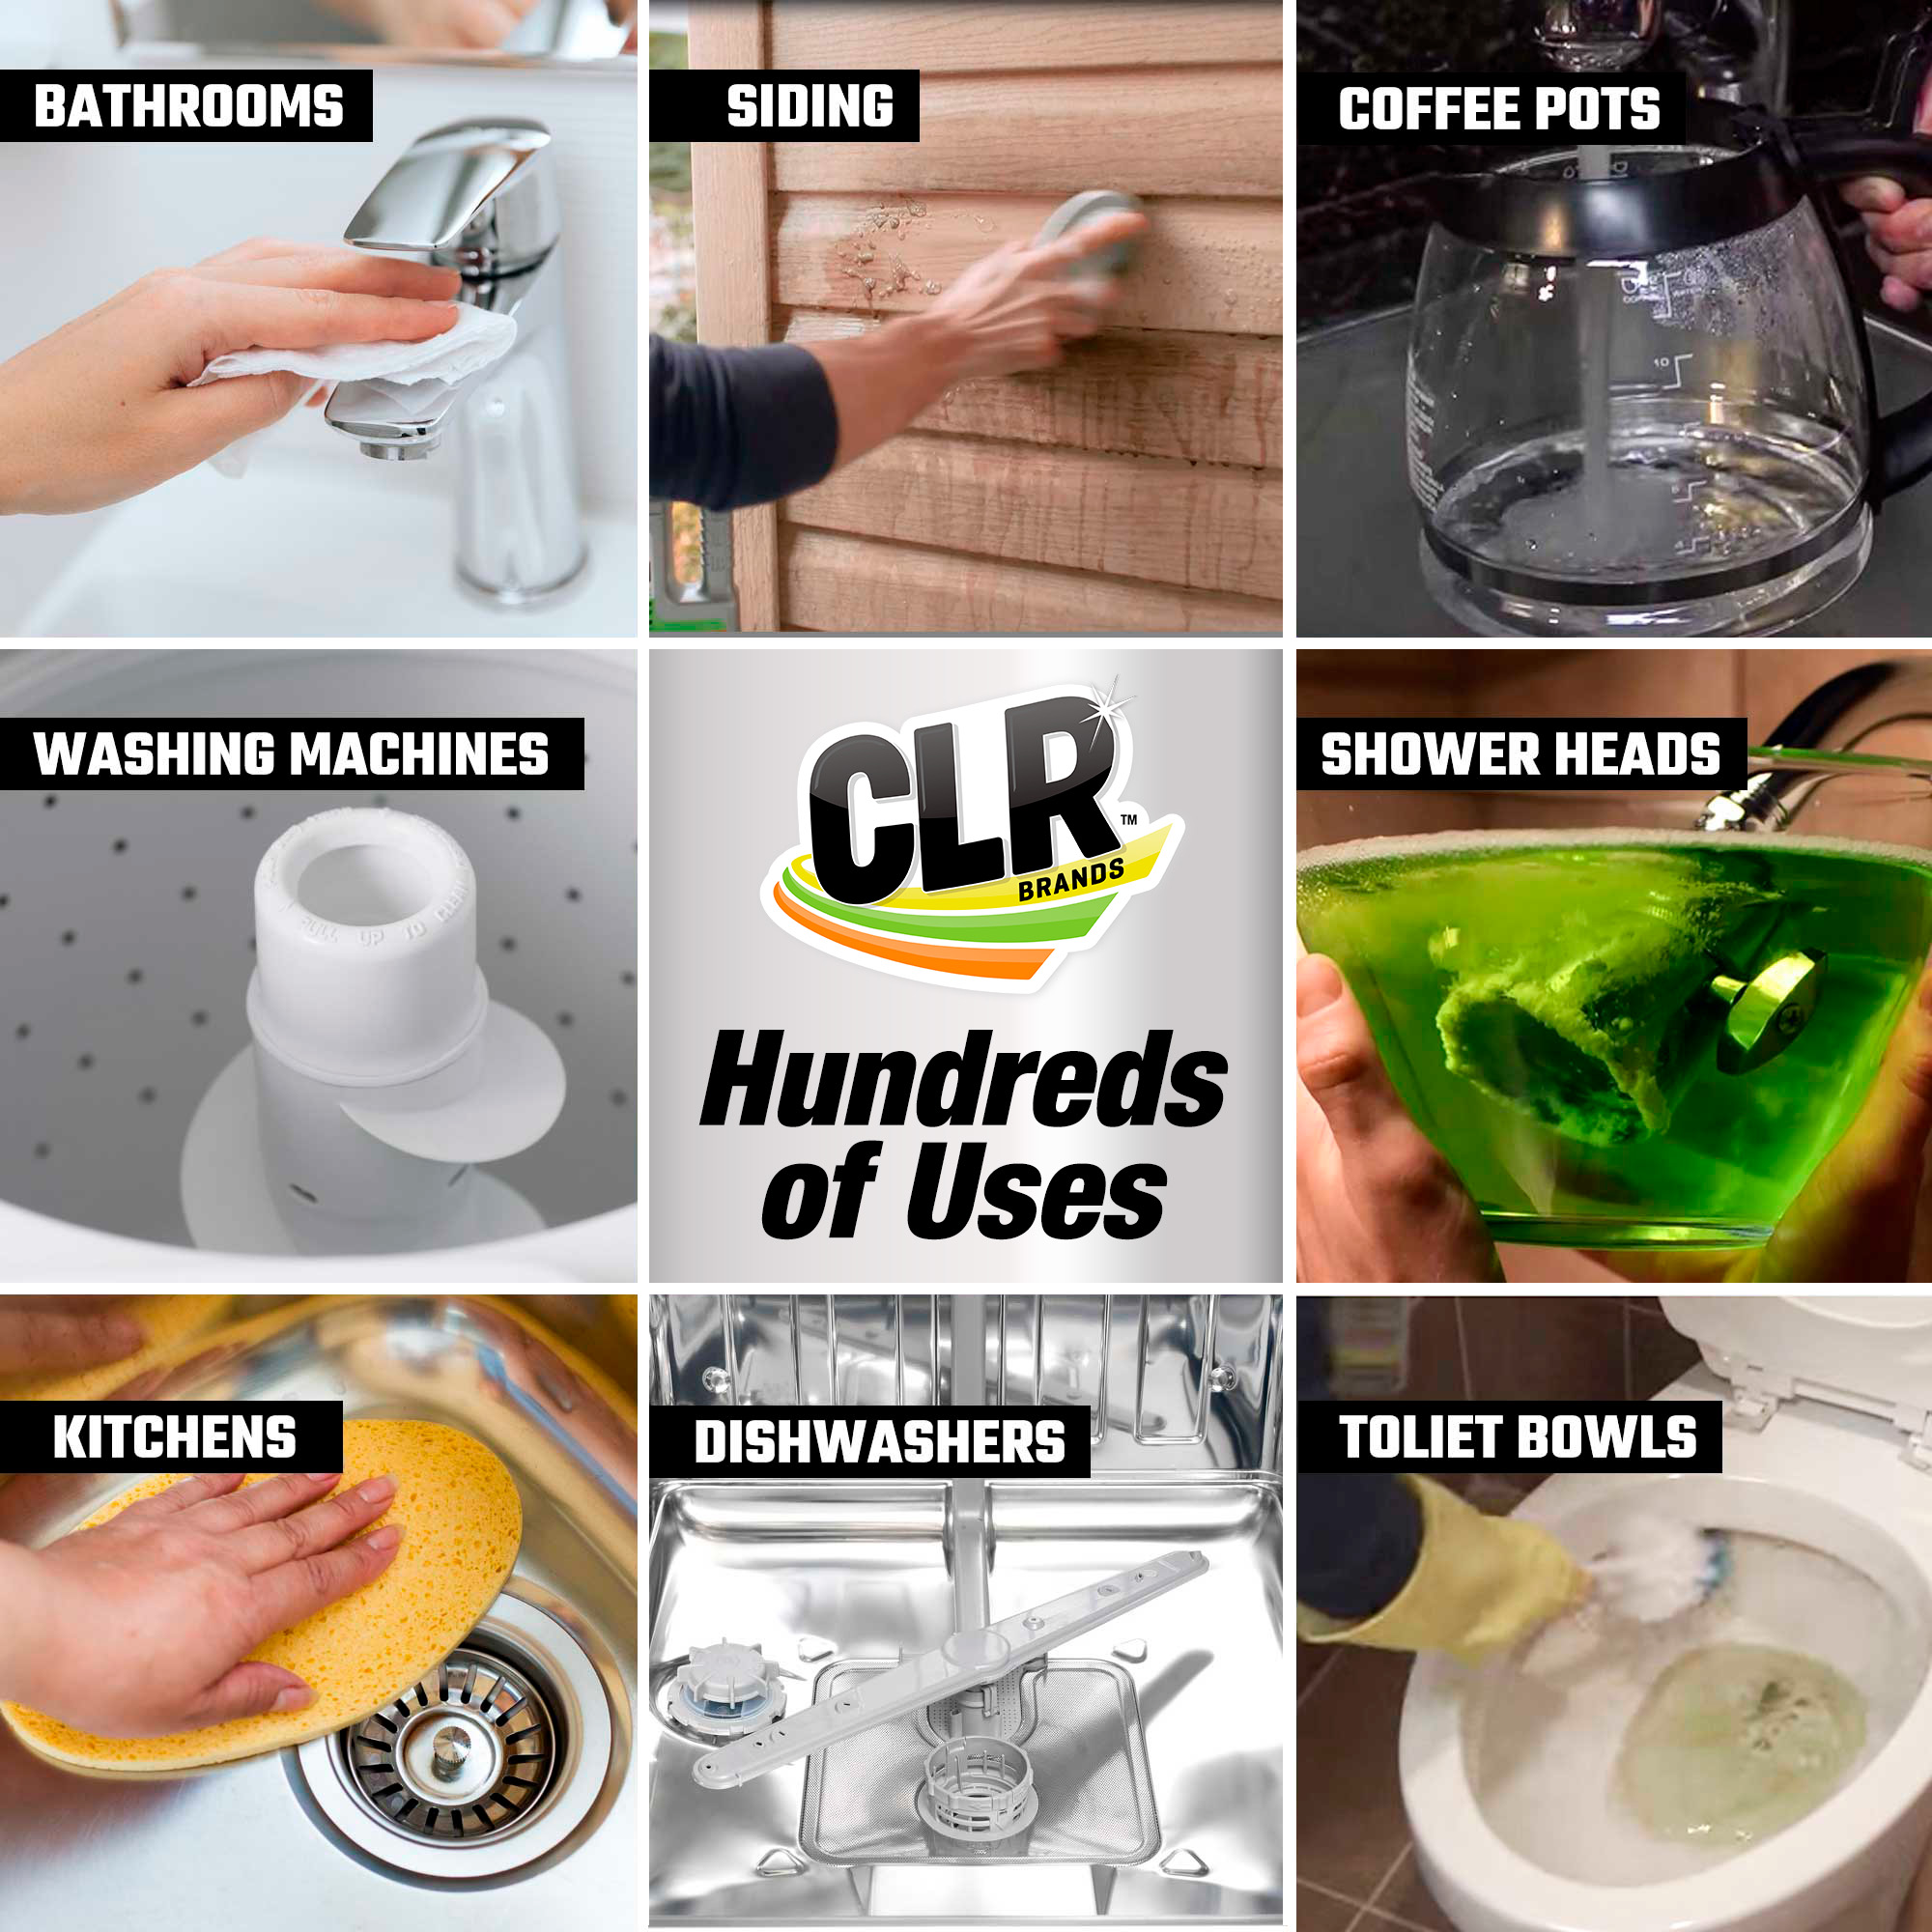 CLR 1-Gallon Calcium, Lime, and Rust Remover - Powerful Non-Toxic Formula  for Multiple Surfaces in the Rust Removers department at